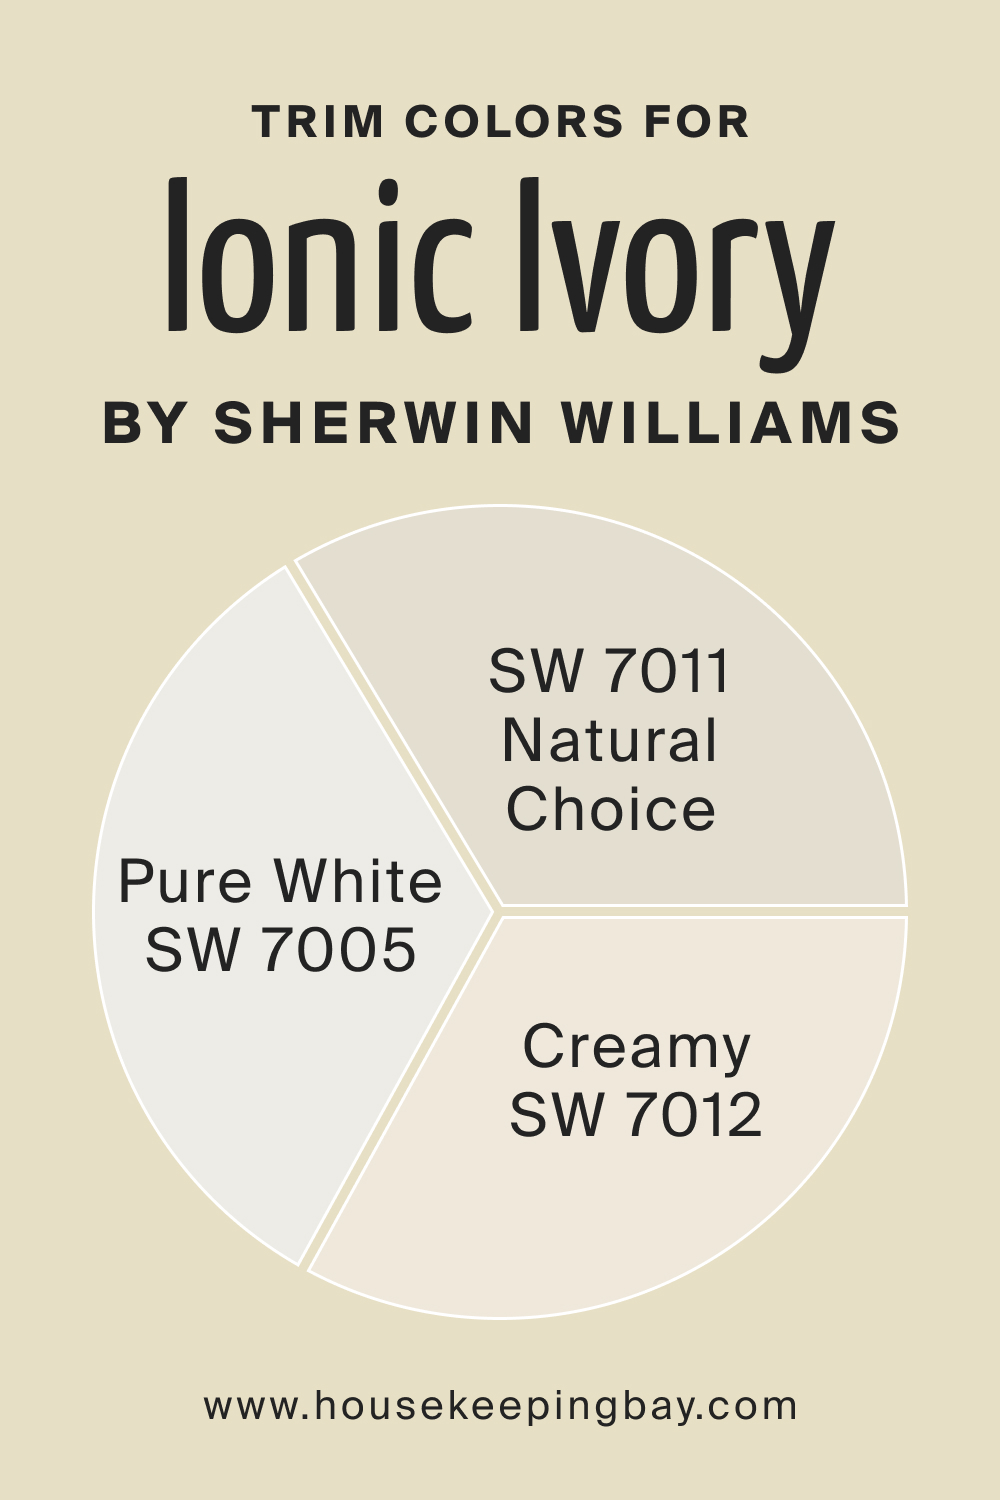 Trim Colors of SW 6406 Ionic Ivory by Sherwin Williams